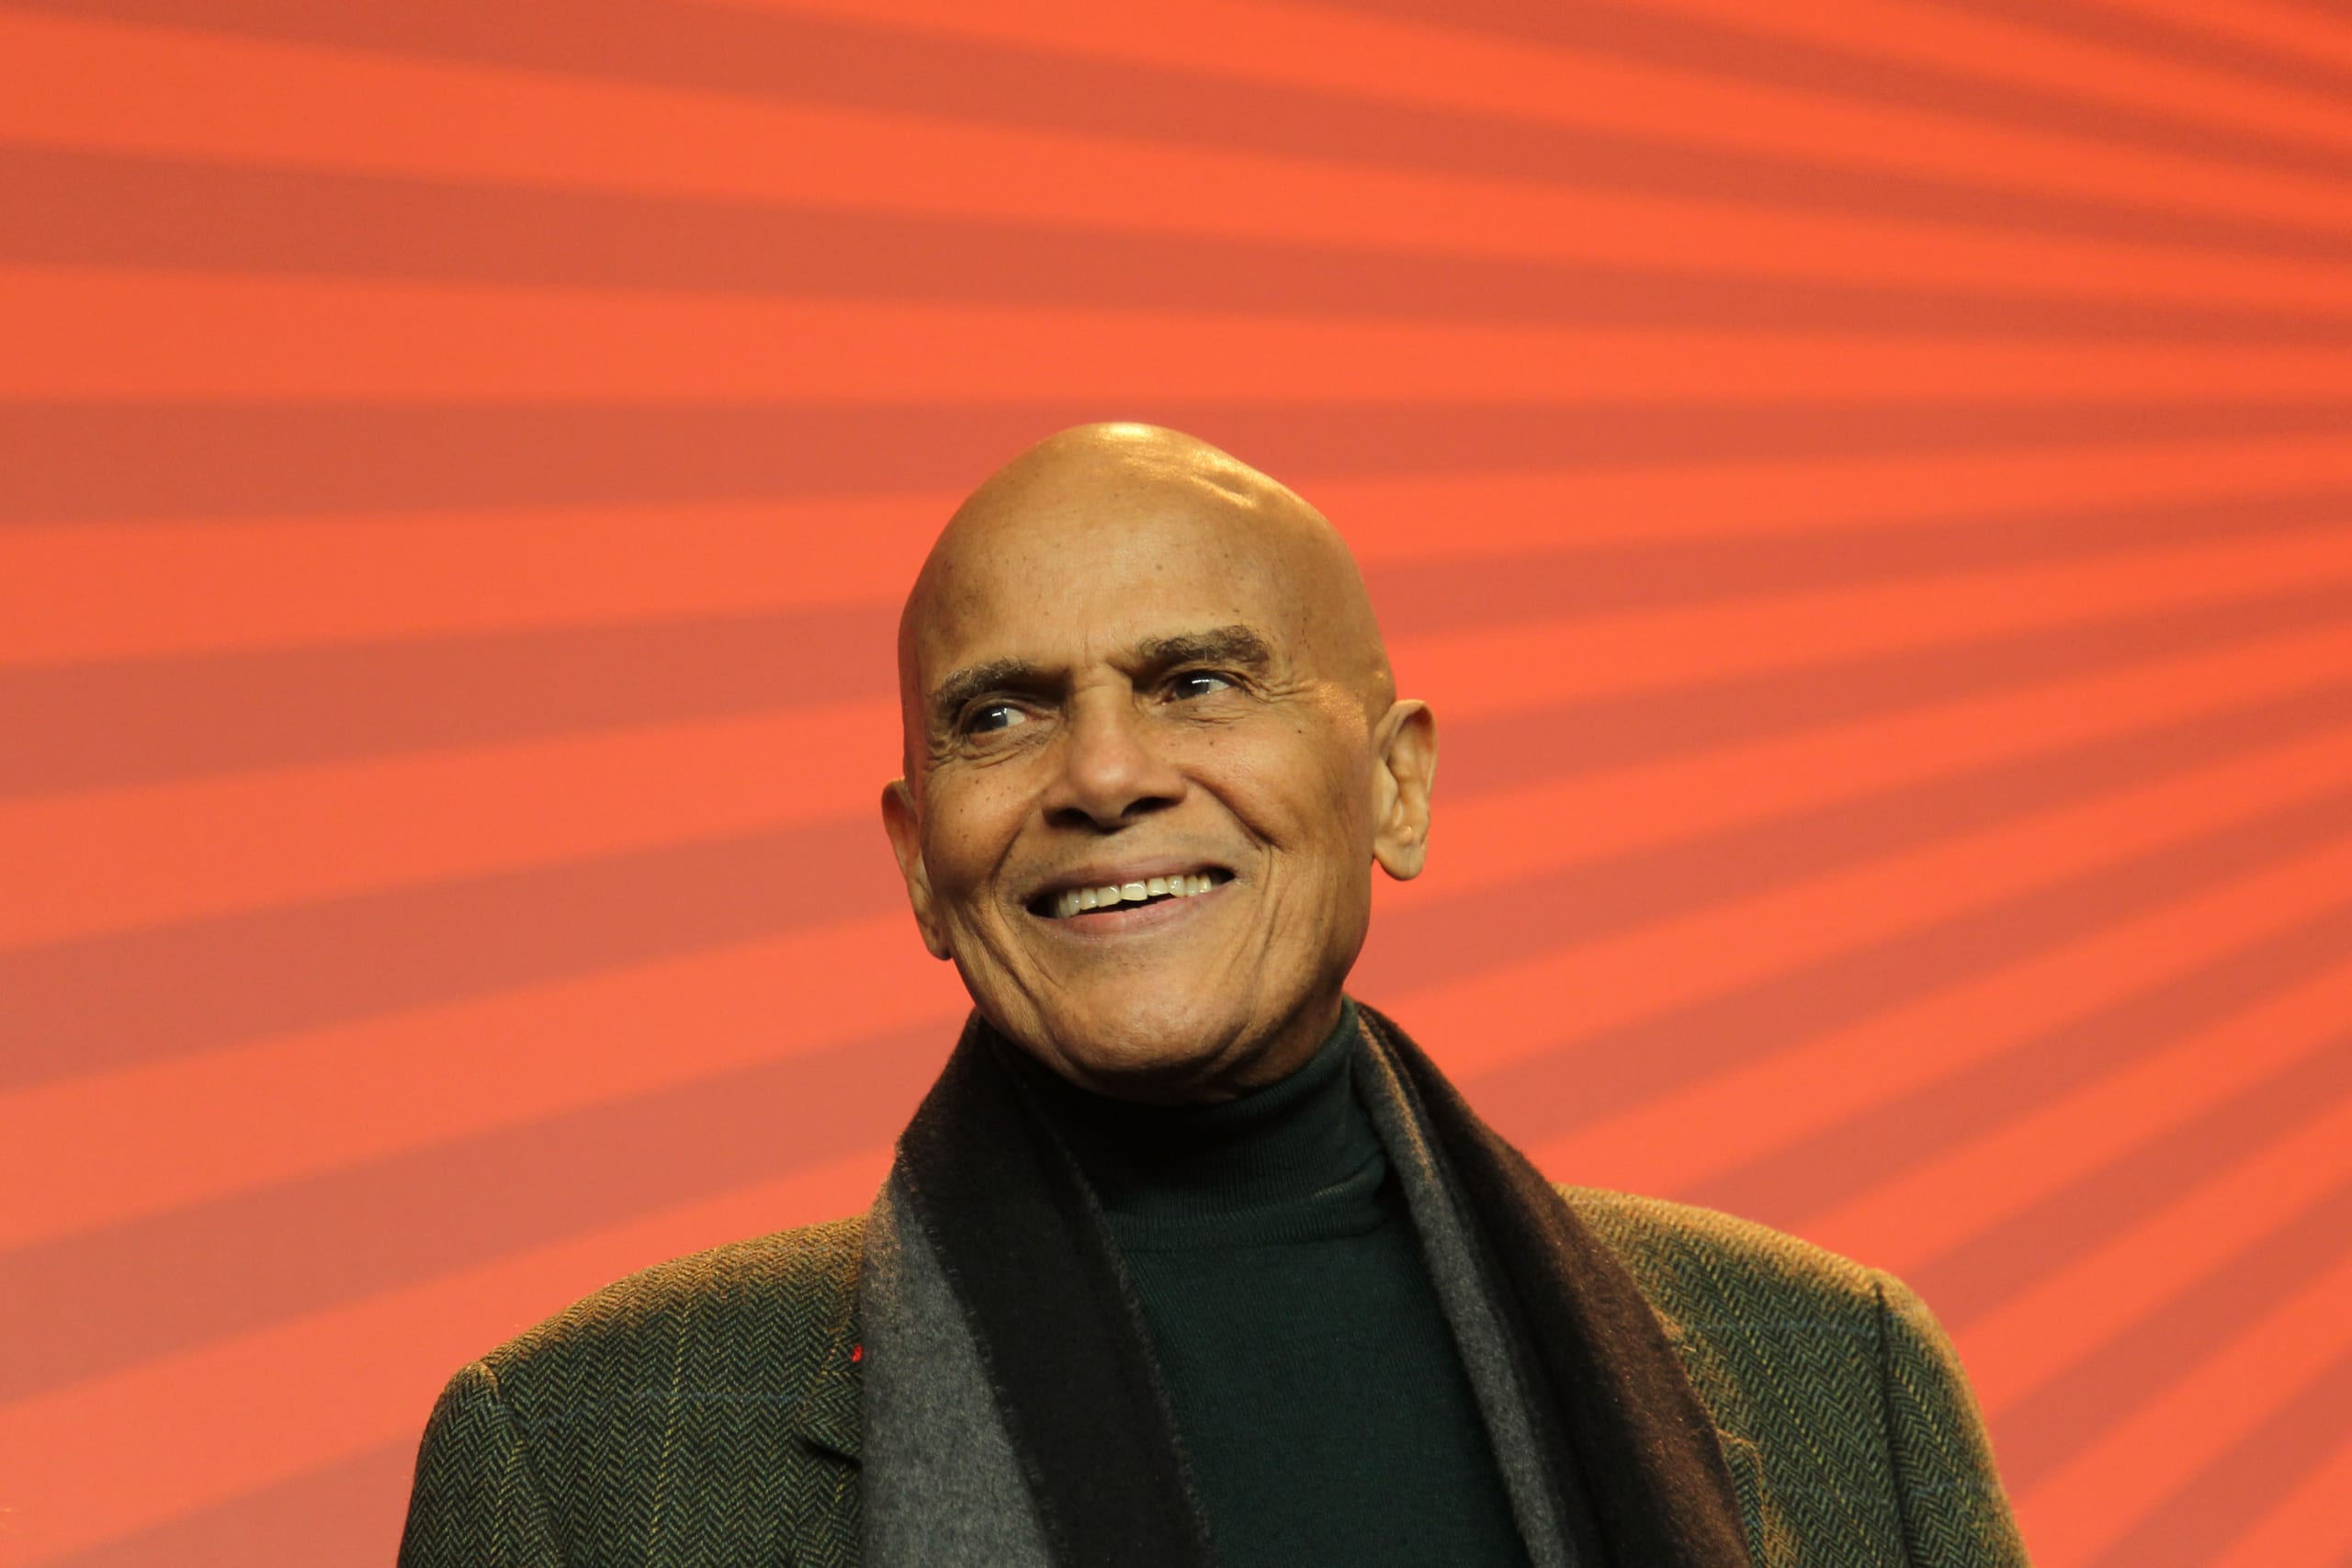 Rest in Love: Harry Belafonte was a beautiful example of Black manhood